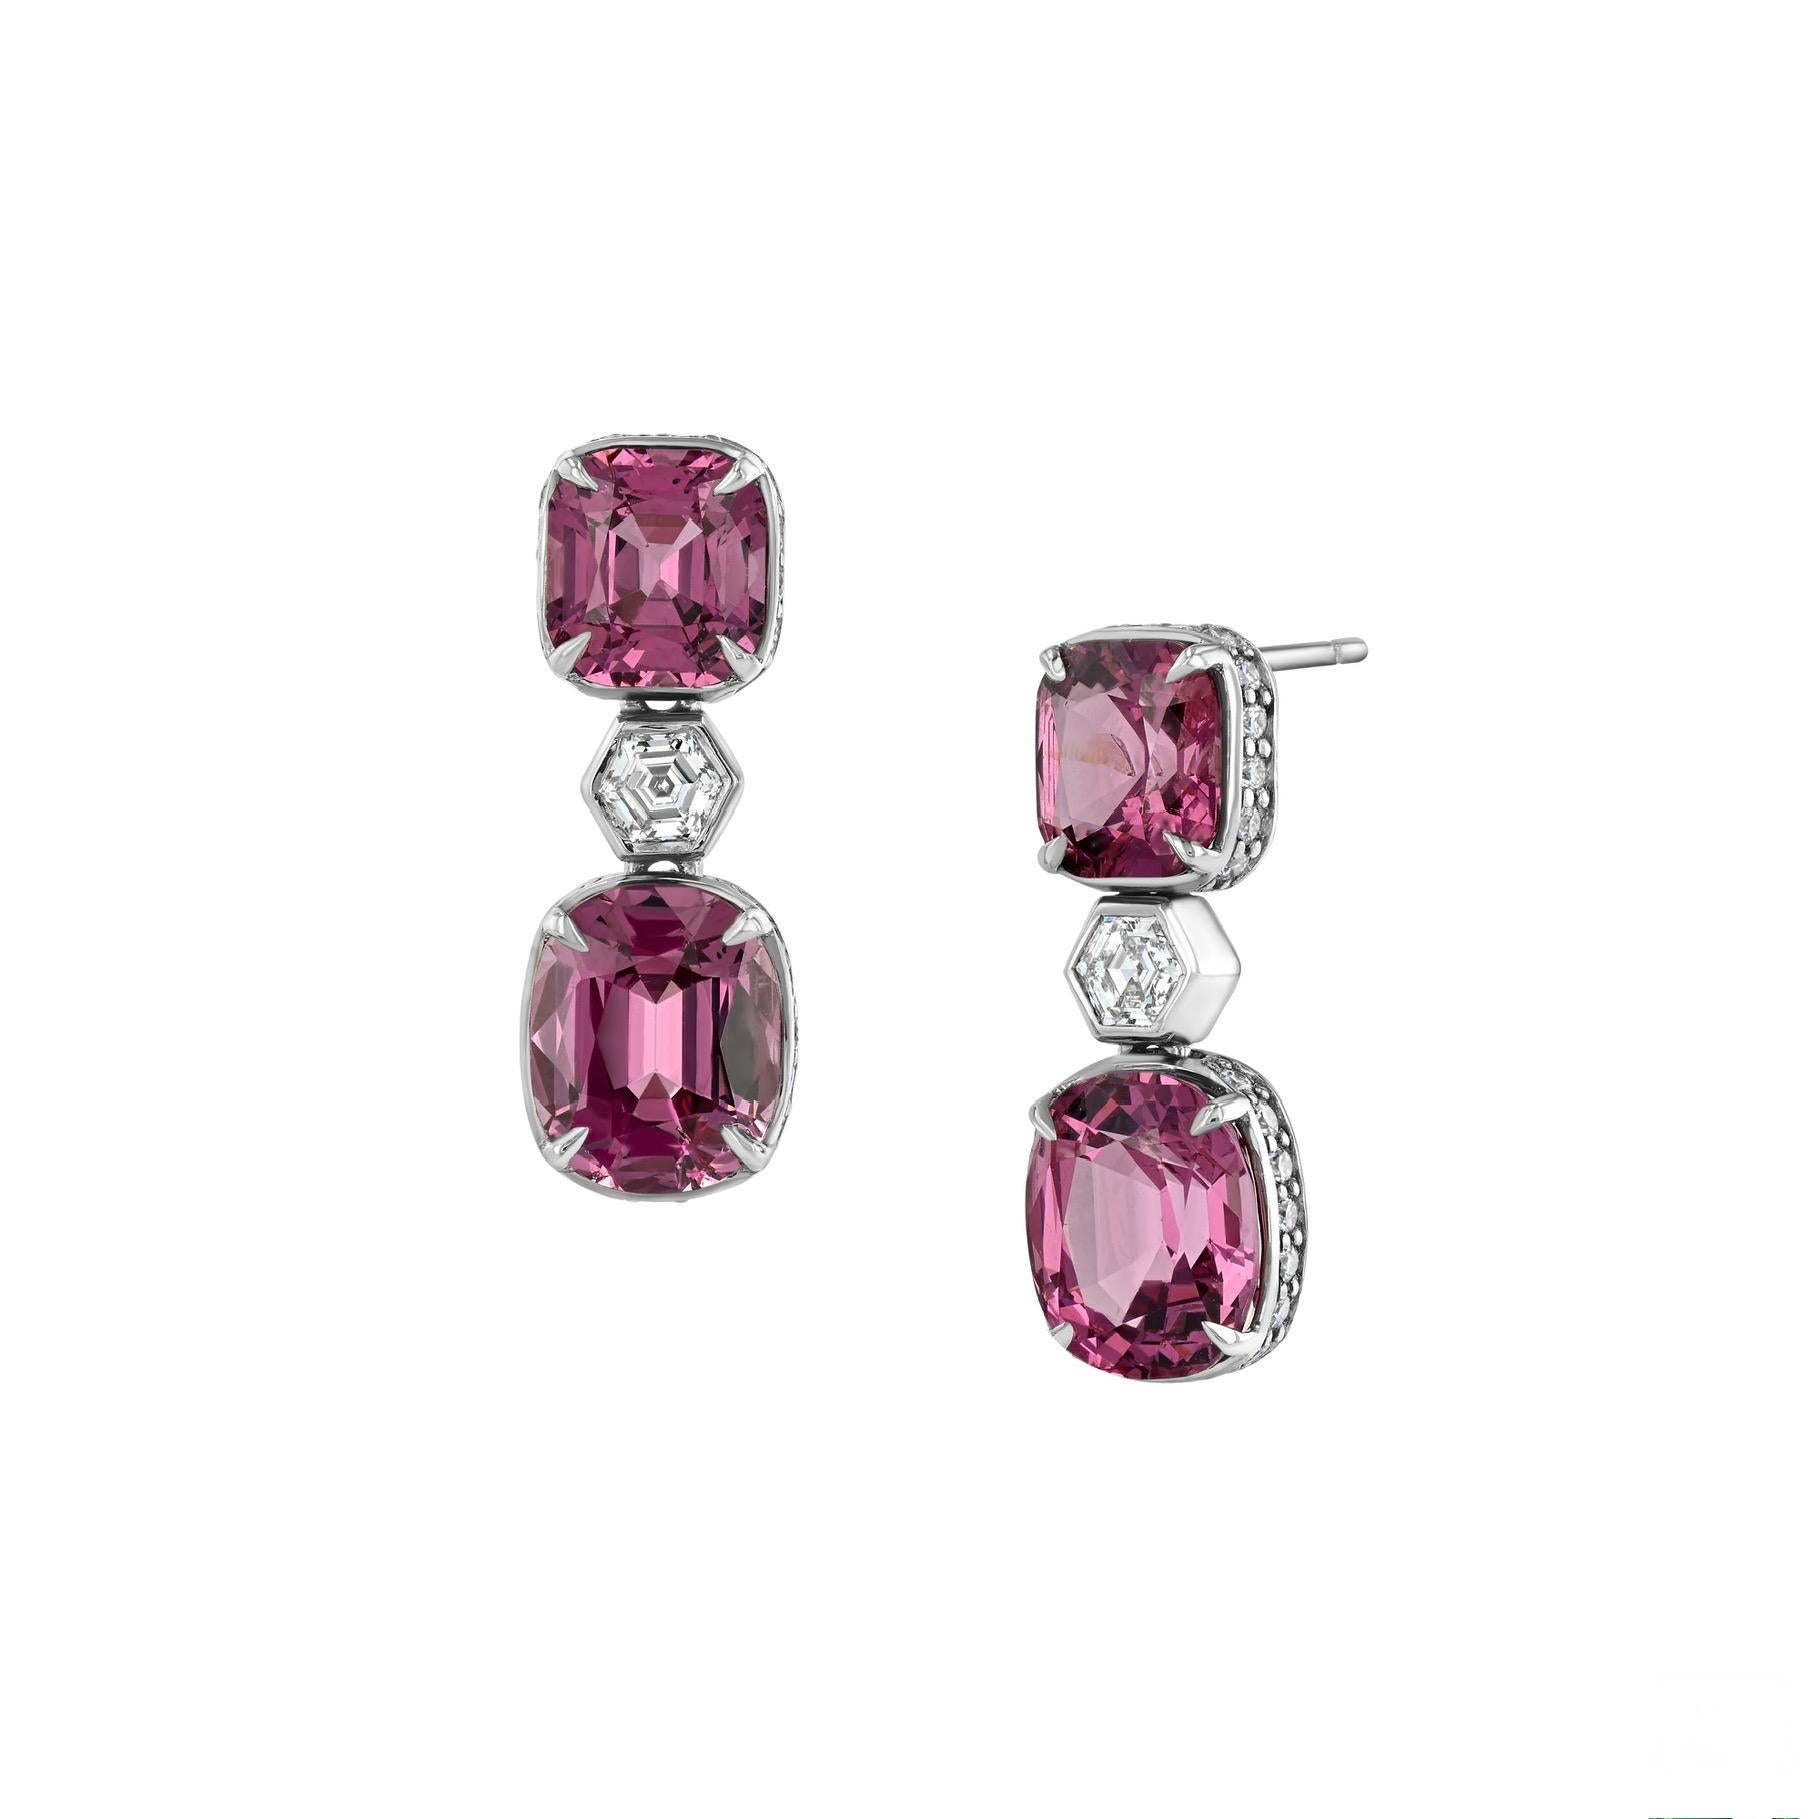 Antique Cushion Cut 6.75ct untreated Burmese spinel earrings in 18K white gold. For Sale